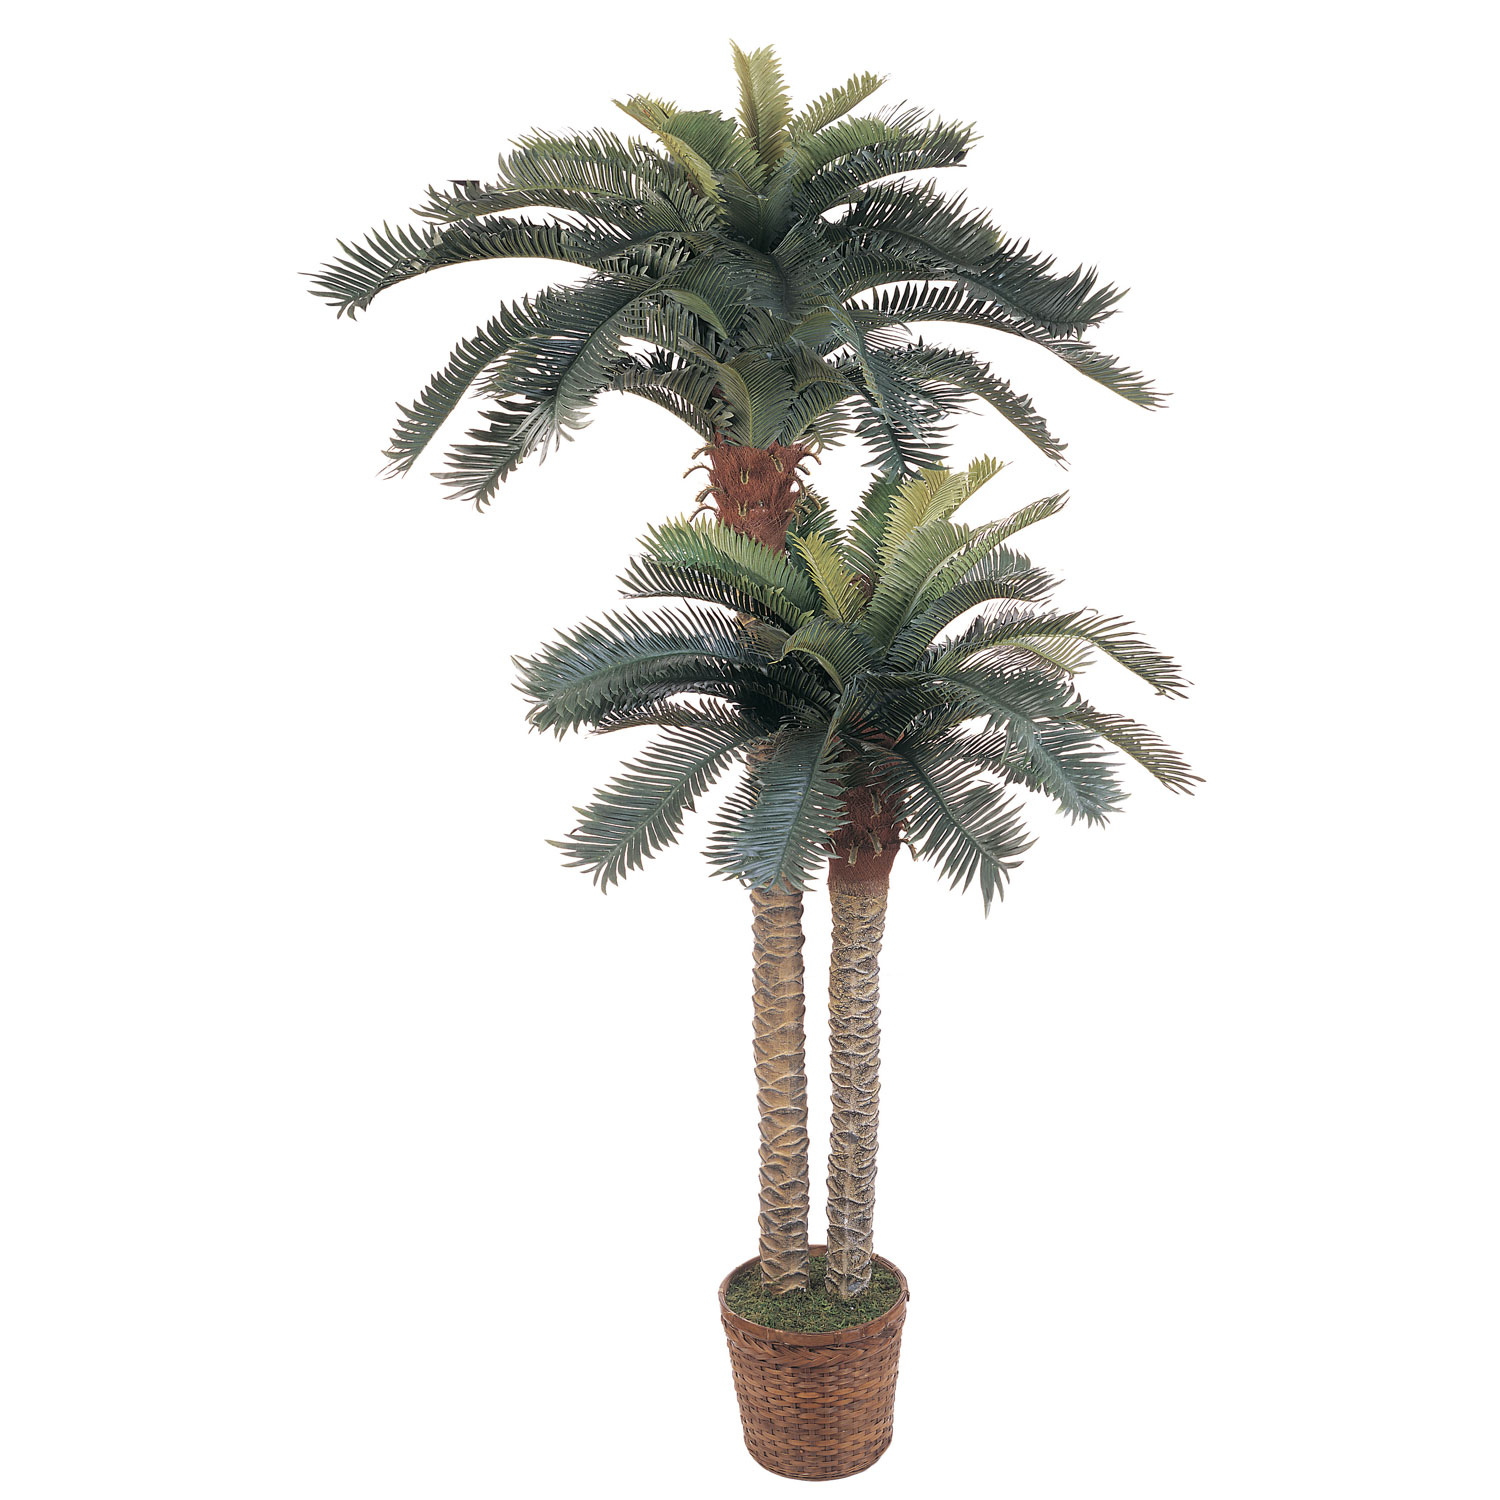 6 Foot And 4 Foot Double Sago Palm In Basket